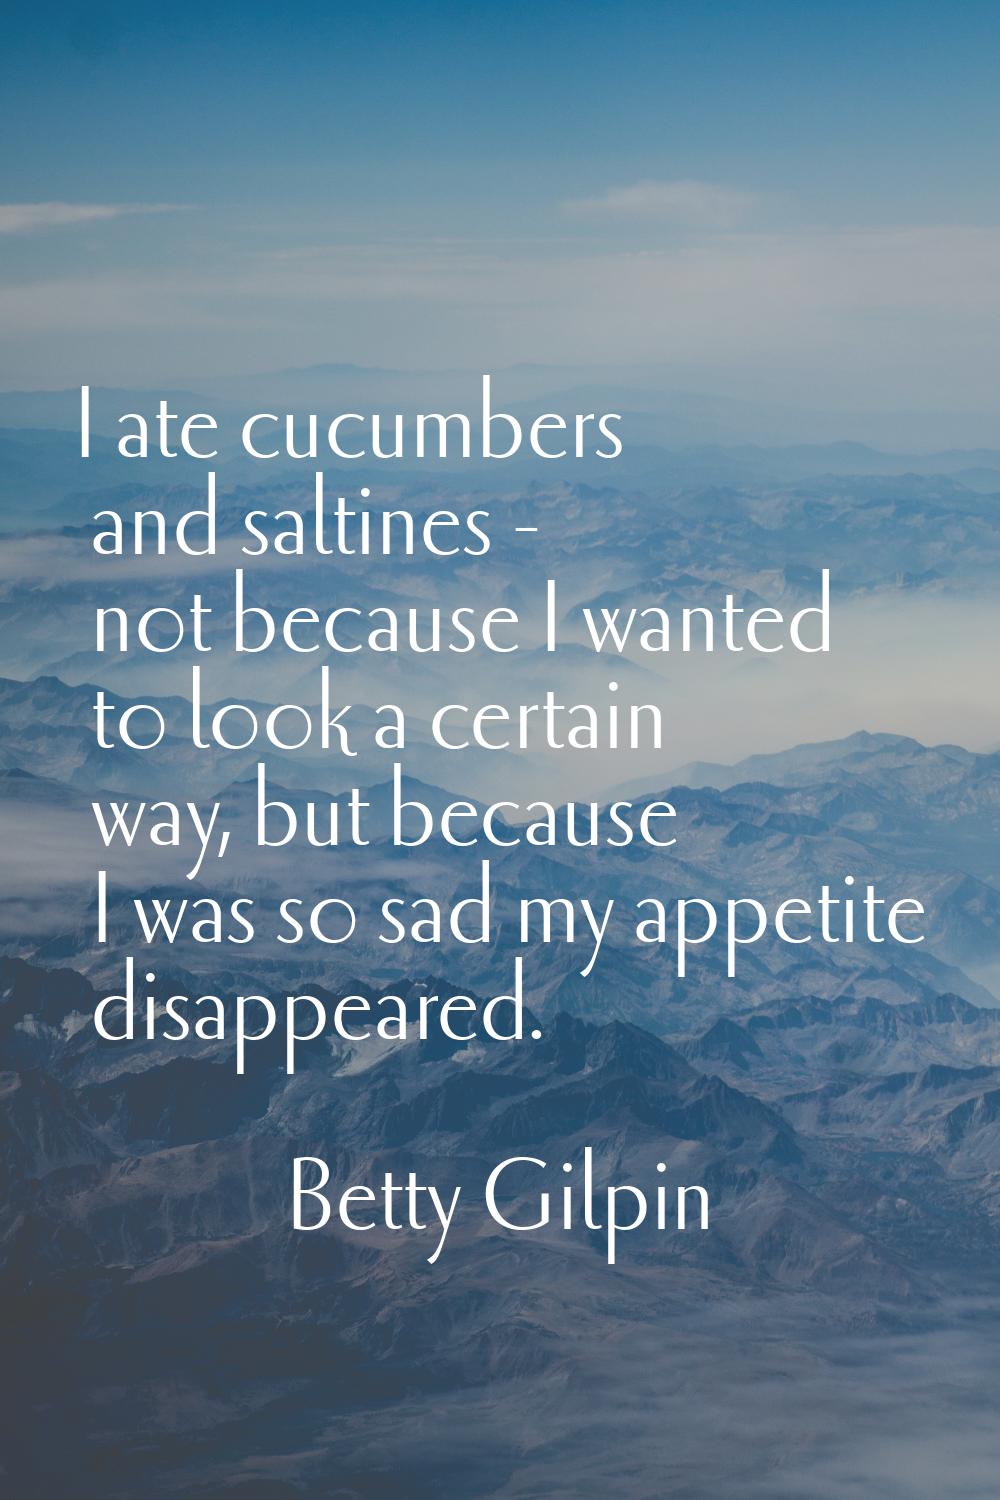 I ate cucumbers and saltines - not because I wanted to look a certain way, but because I was so sad